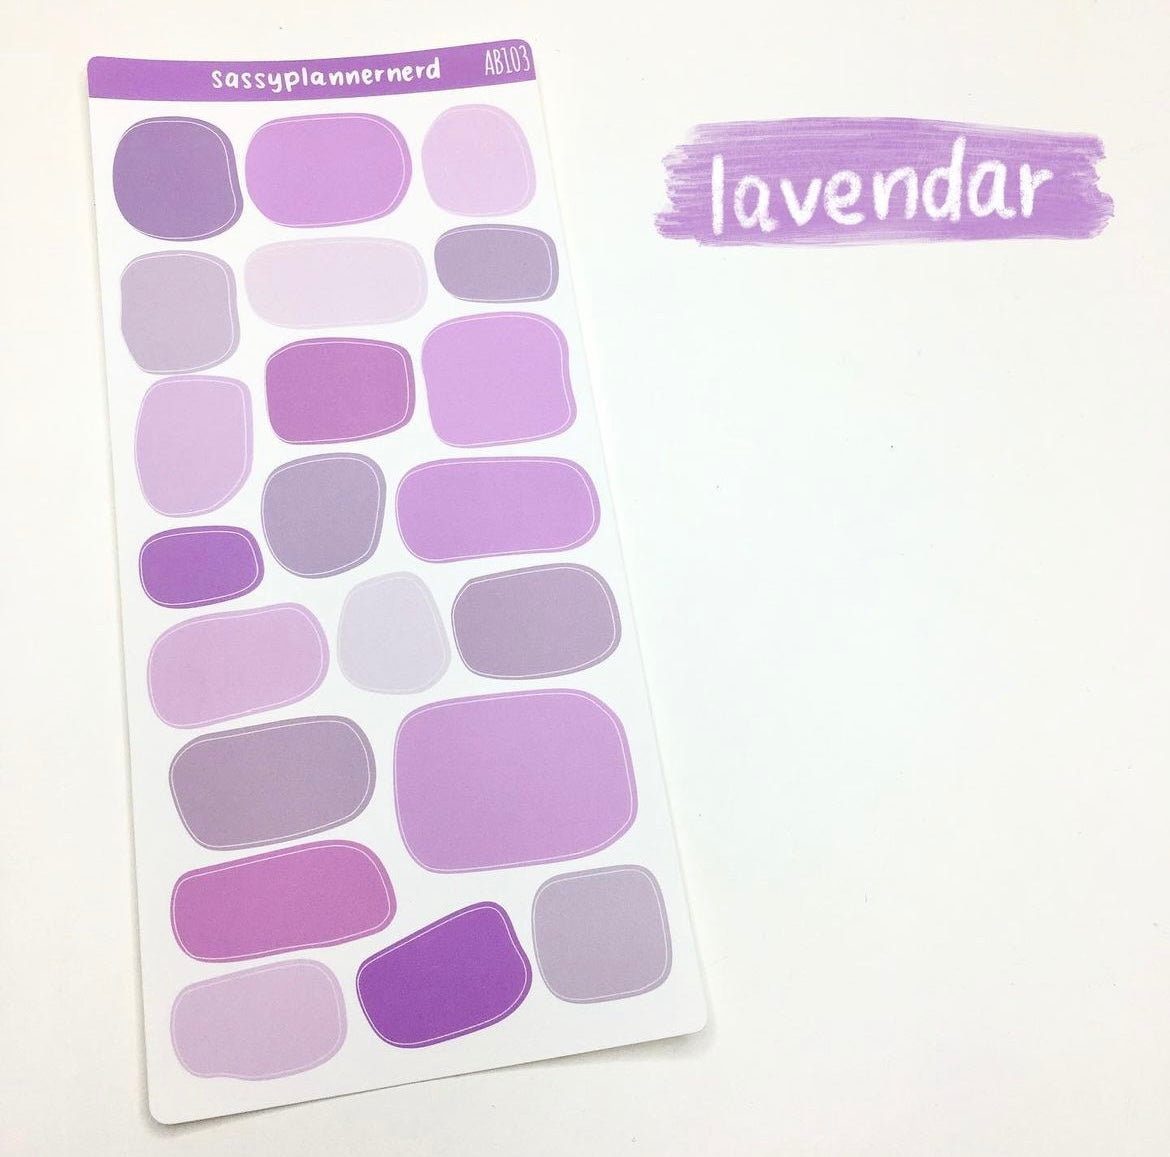 Lavendar | Abstract color swatches